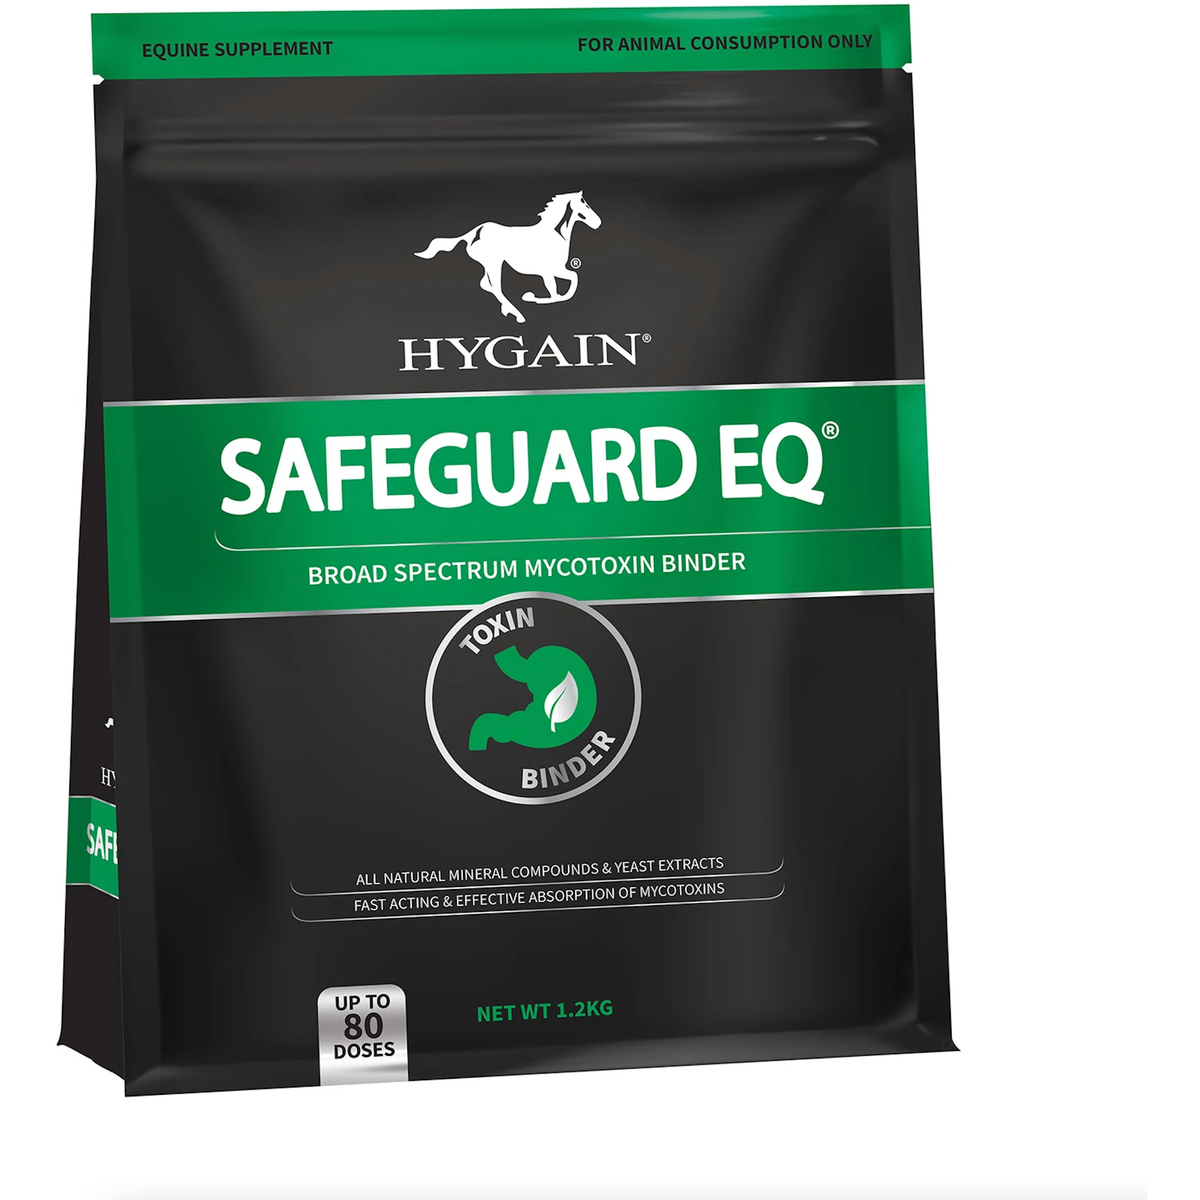 HYGAIN FEED SUPPLEMENTS 1.2KG Hygain Safeguard Eq Toxin Binder For Horses